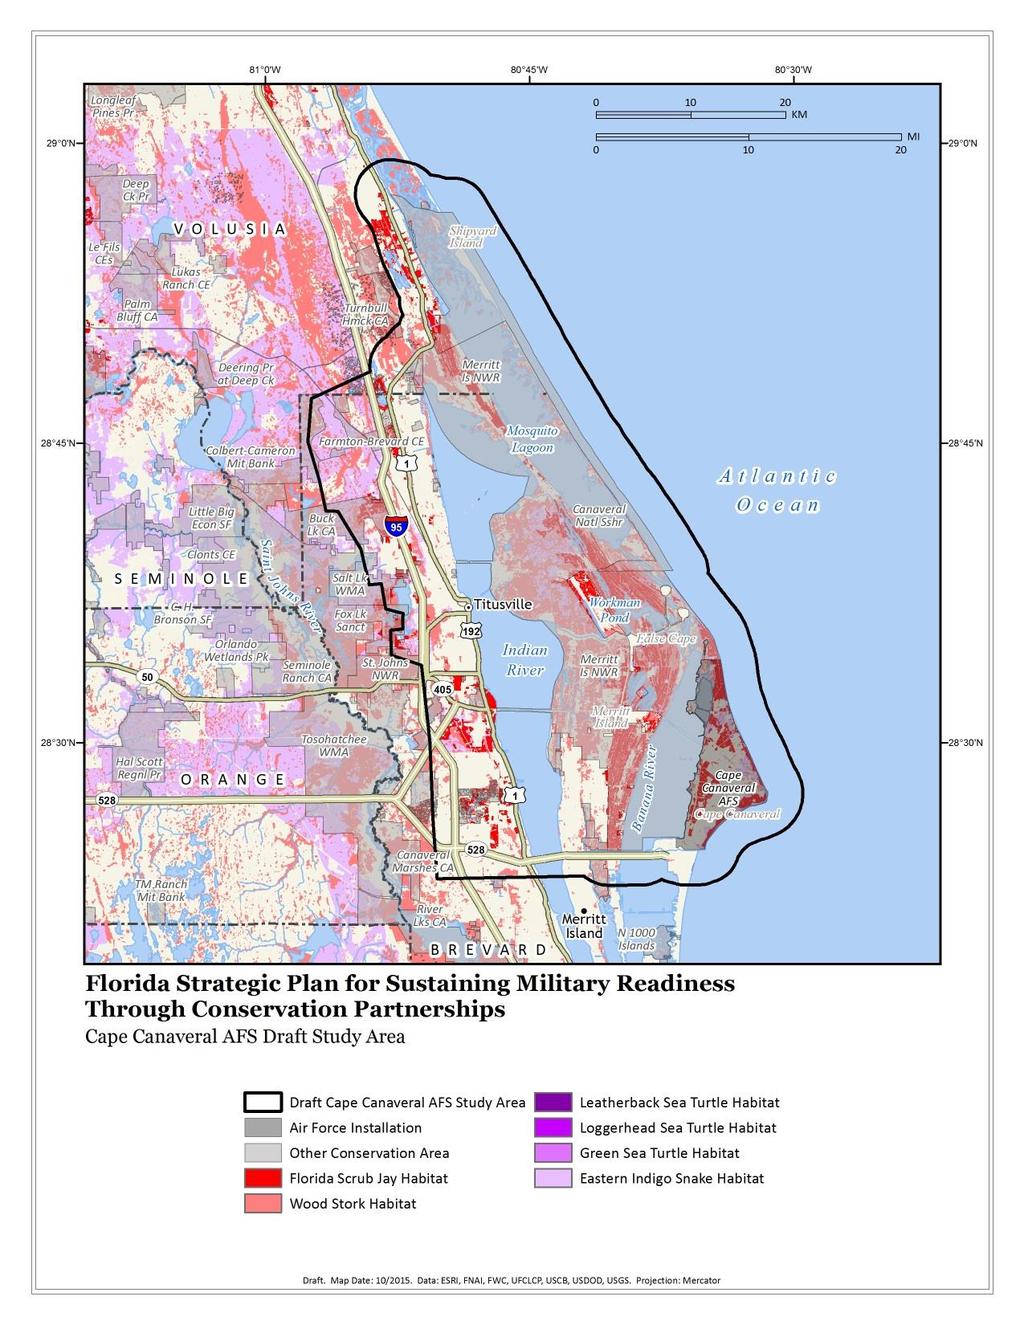 Draft Study Areas: Cape Canaveral AFS Potential Florida scrub-jay habitat on the mainland that might provide mitigation opportunities and stepping stones to connect Canaveral jays to other